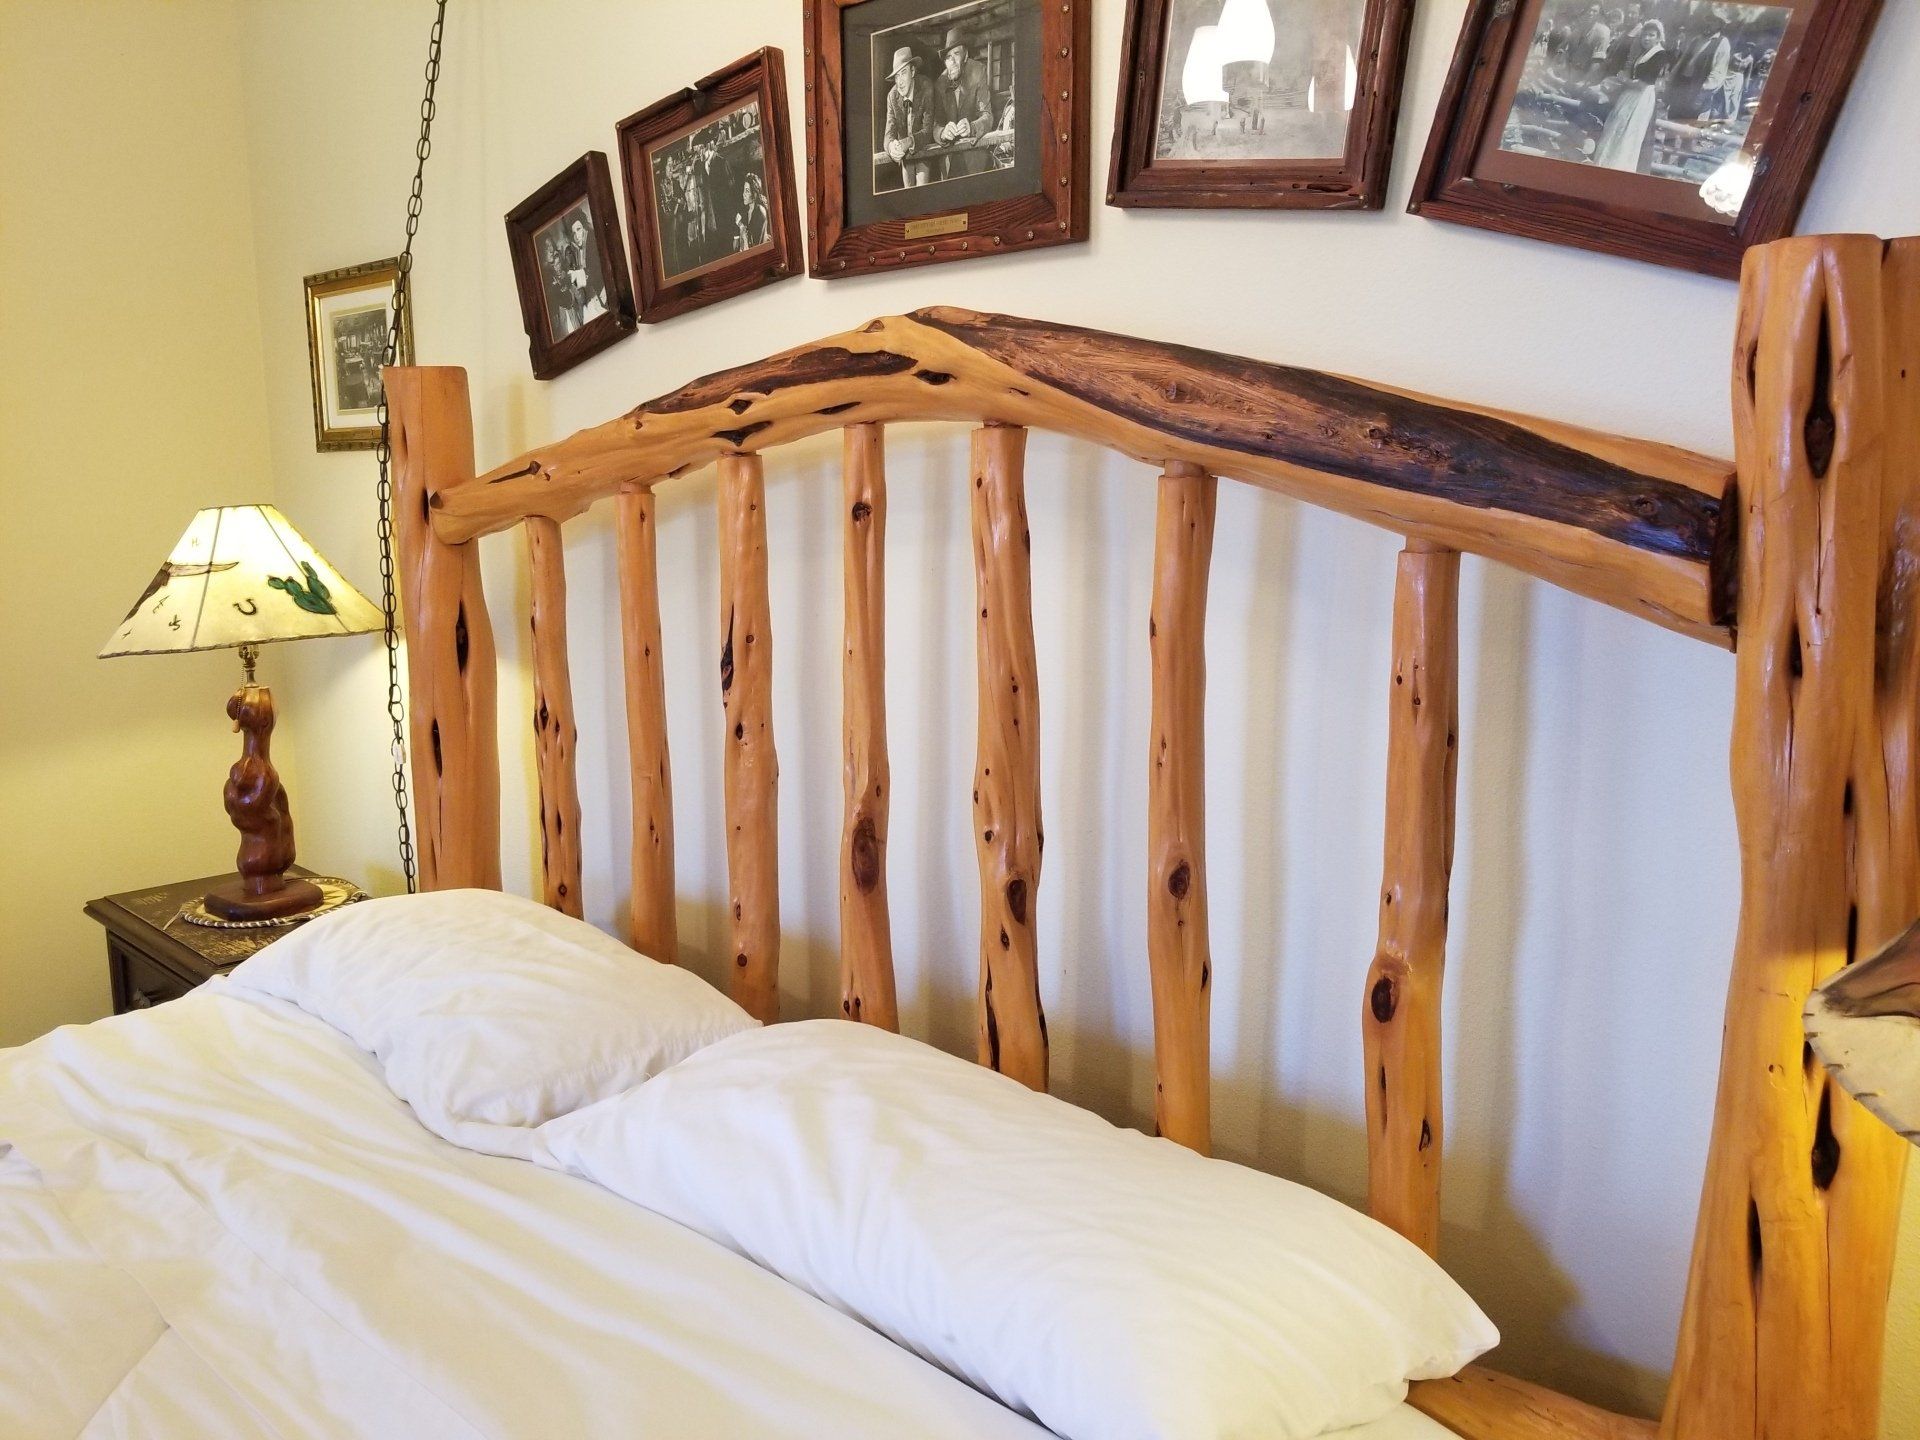 Western style bed